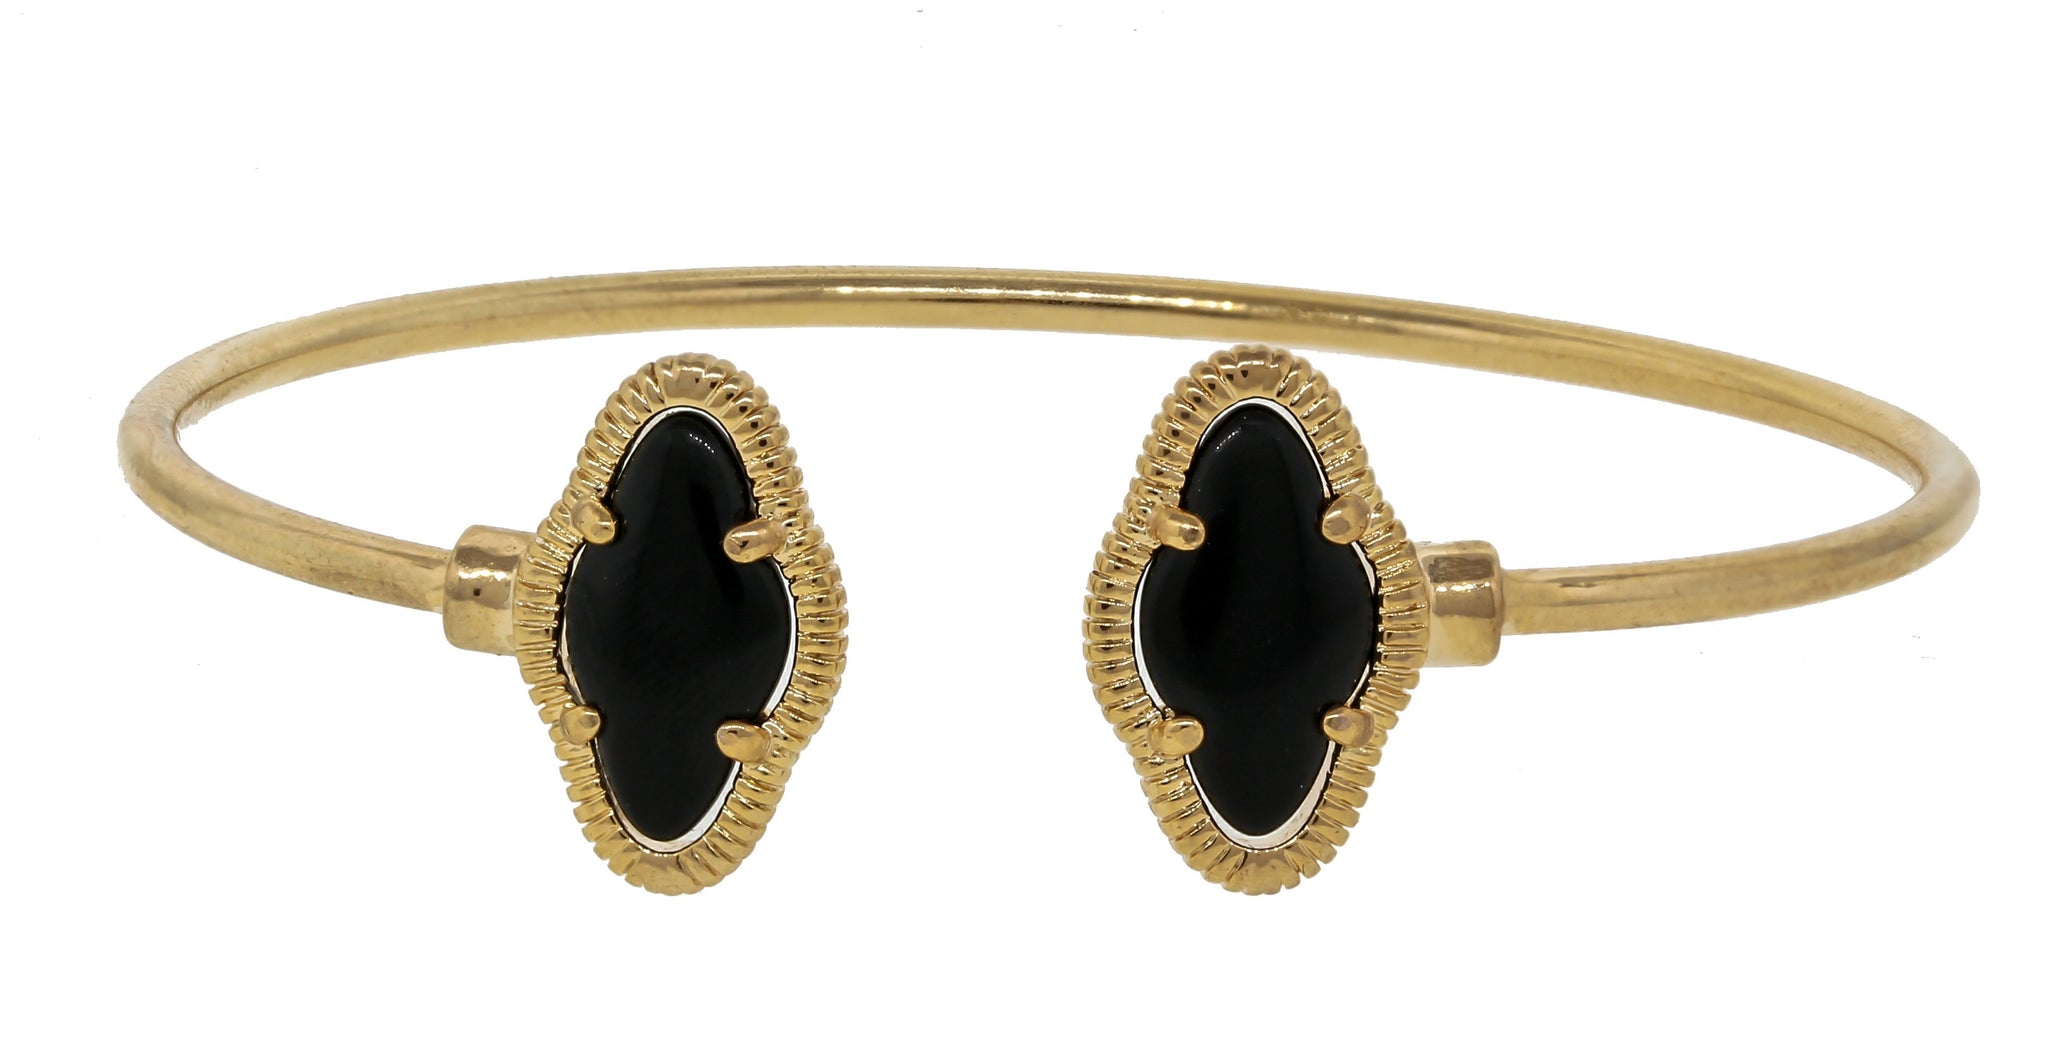 Thin open cuff bangle with elongated clover ends 681b5650